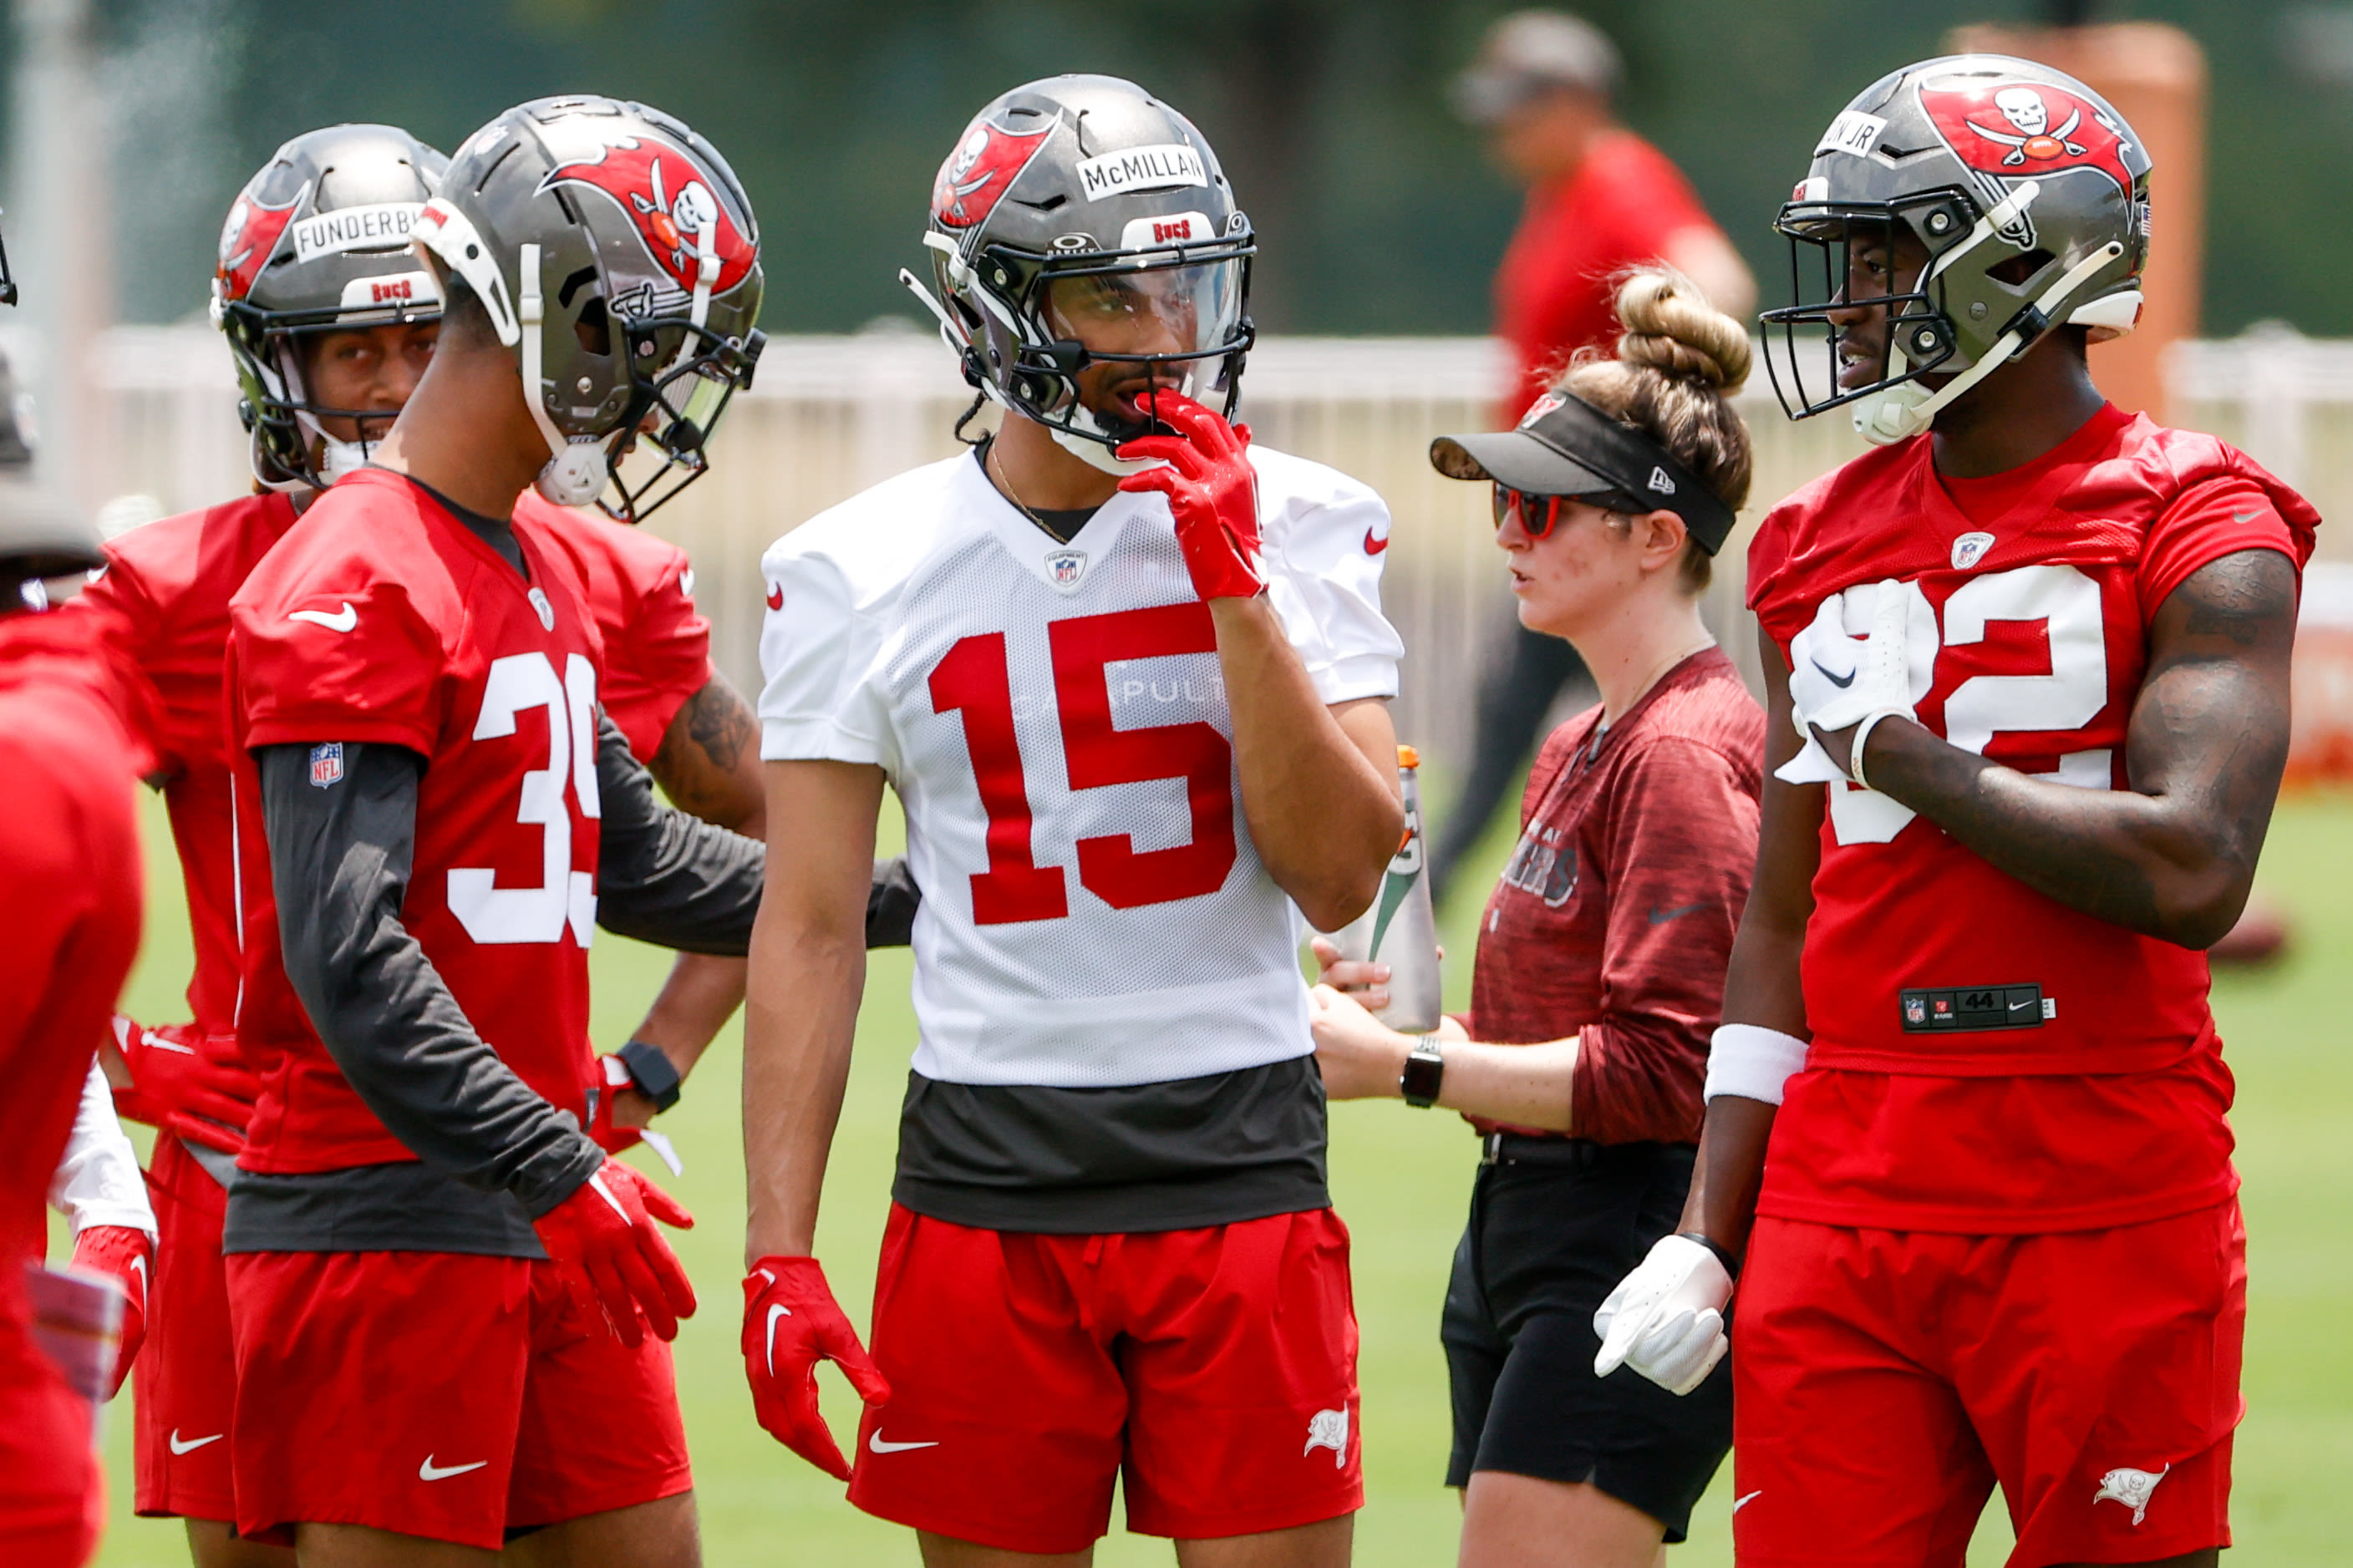 Explosive receiver Jalen McMillan could fire some cannons as Bucs rookie